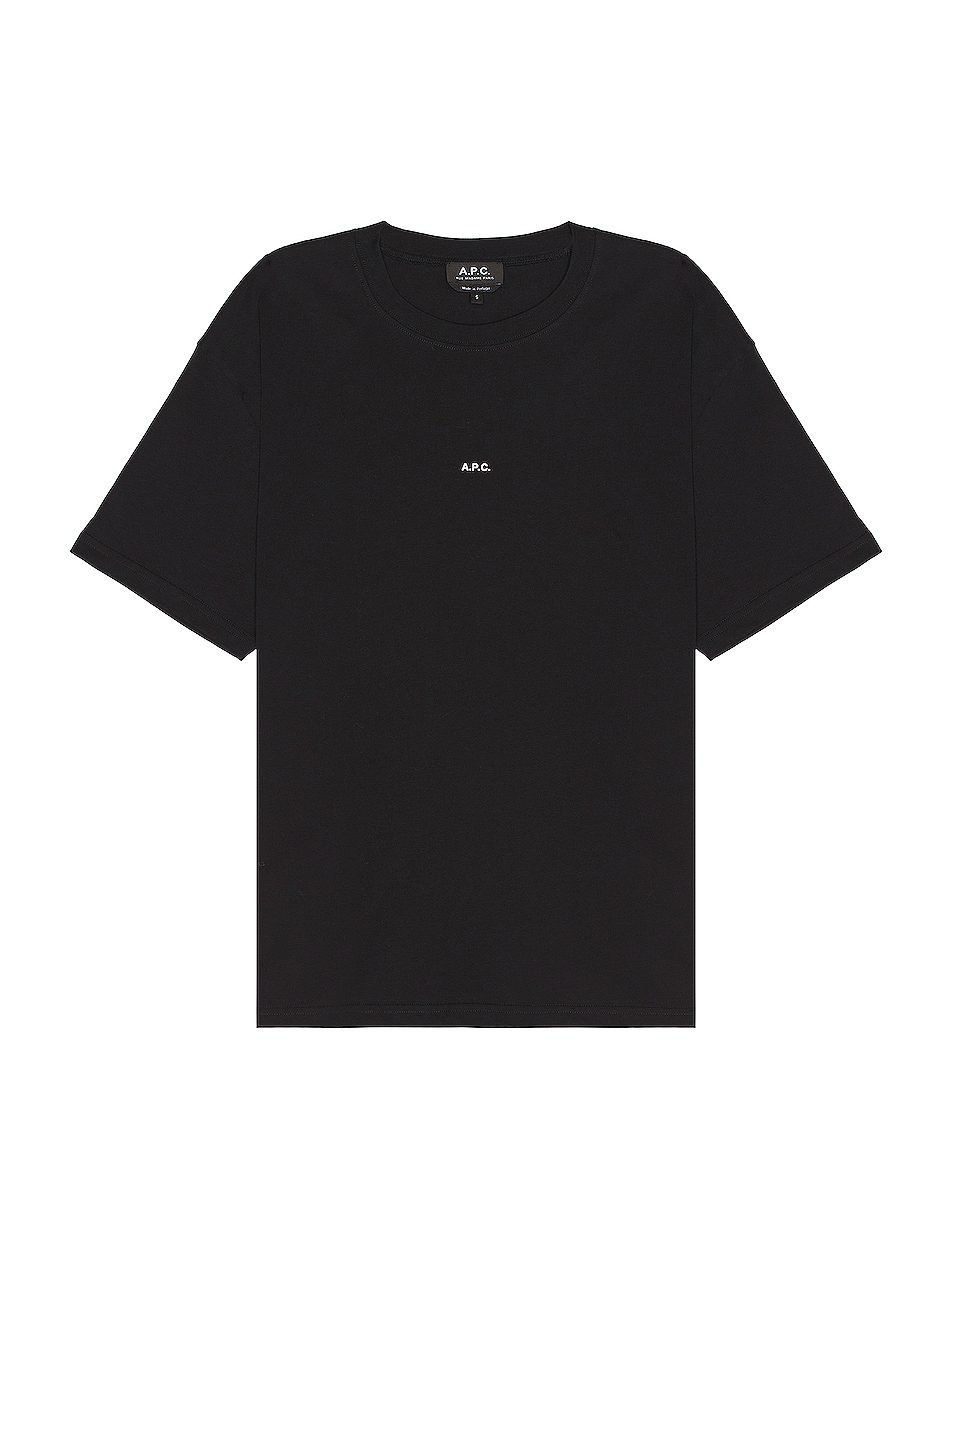 Image 1 of A.P.C. Kyle T-shirt in Black